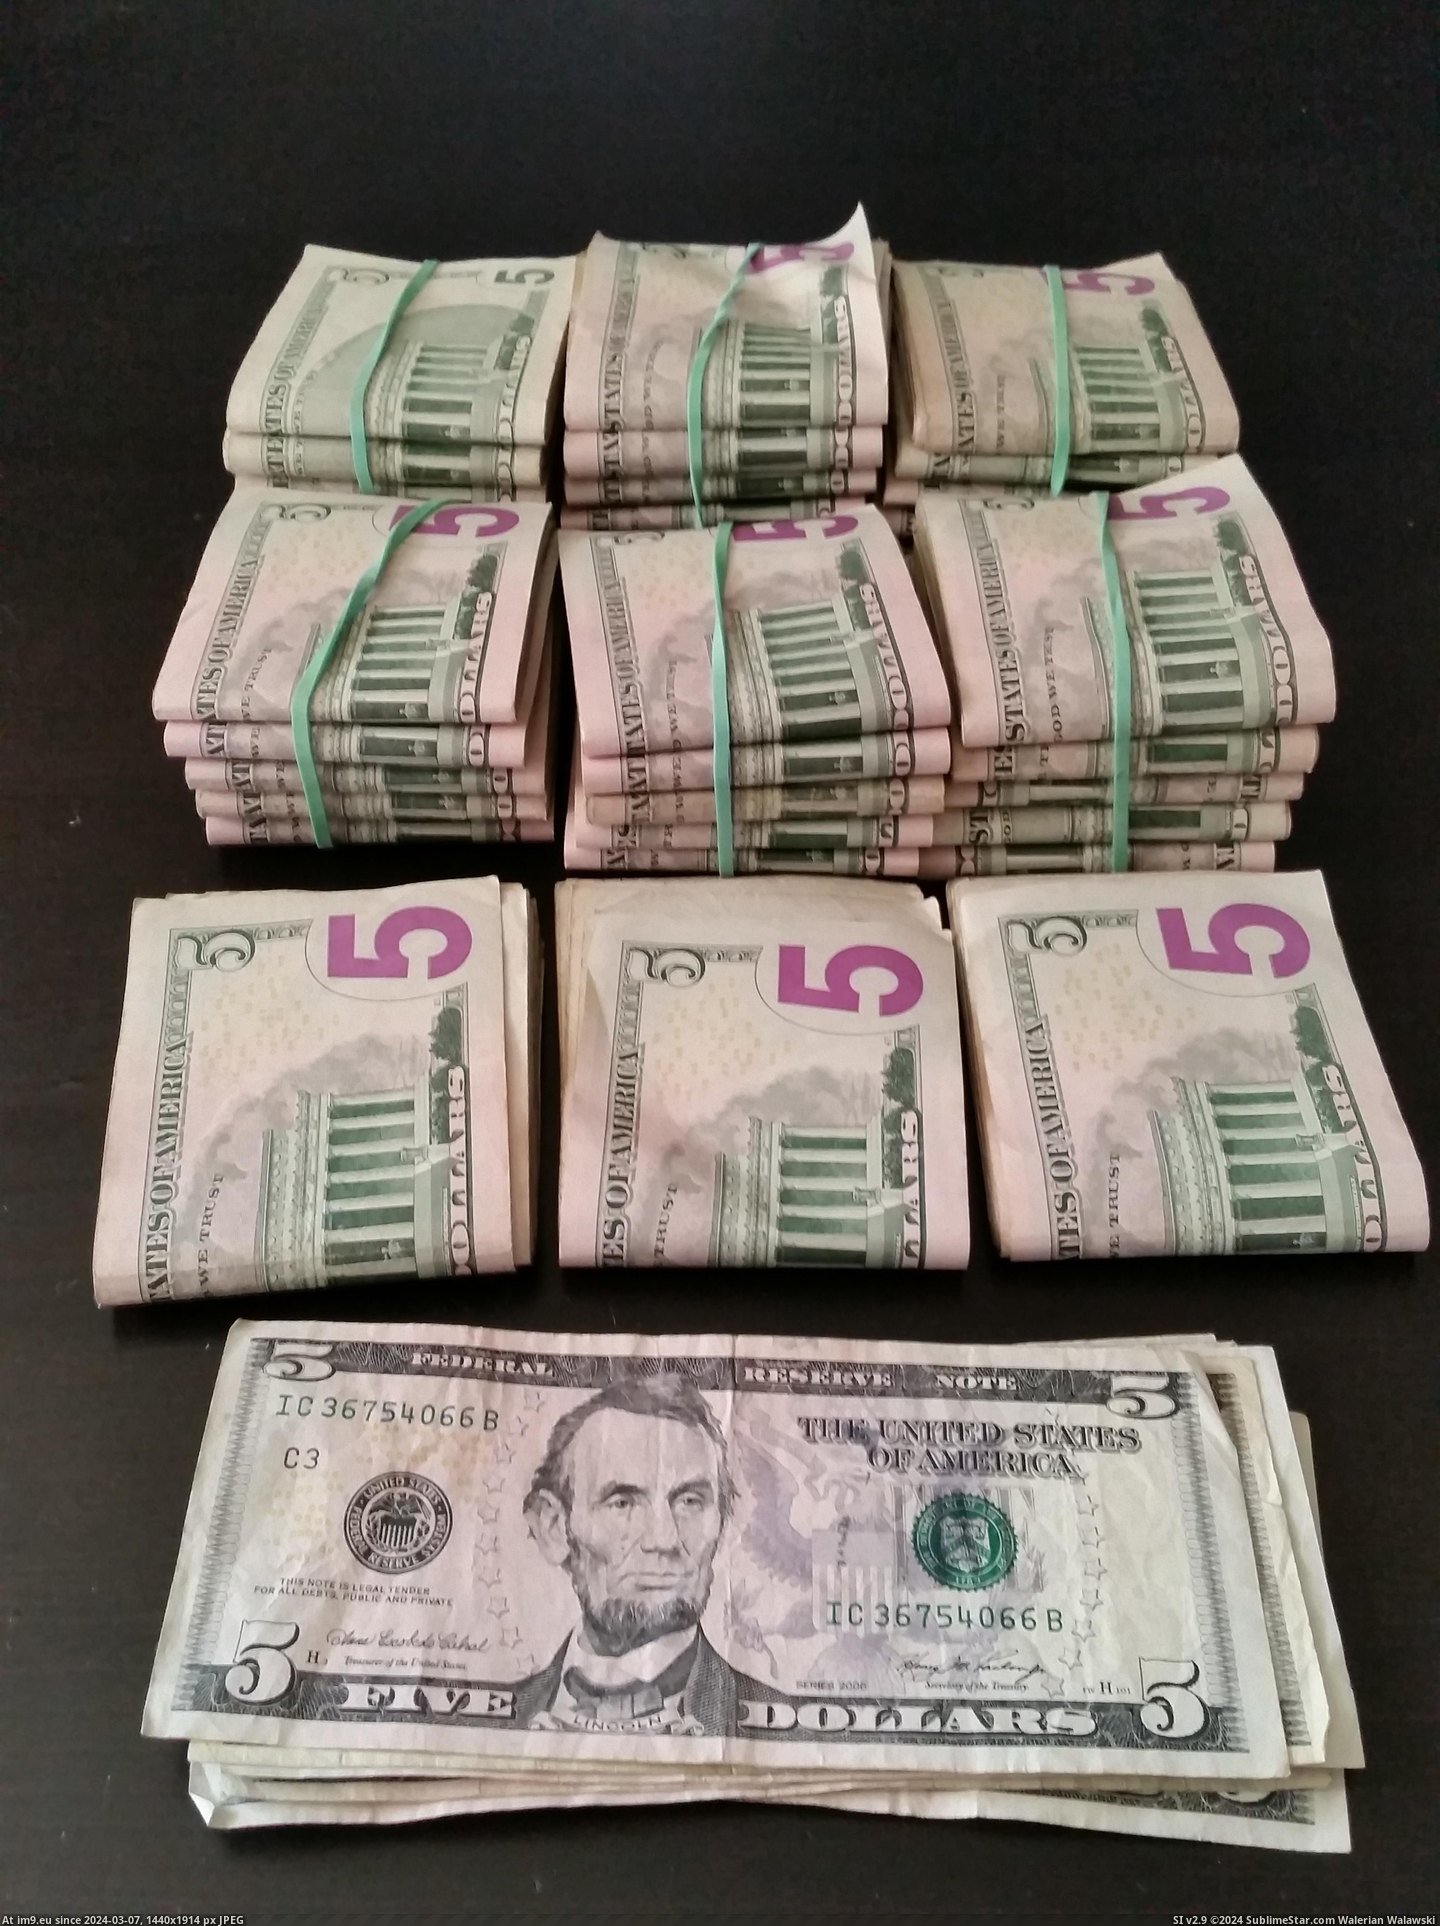 #For #Year #Put #Possession #Saved #Bill [Pics] For the past year, I put away every $5 bill that came into my possession. To date, I've saved $3,335. Pic. (Изображение из альбом My r/PICS favs))